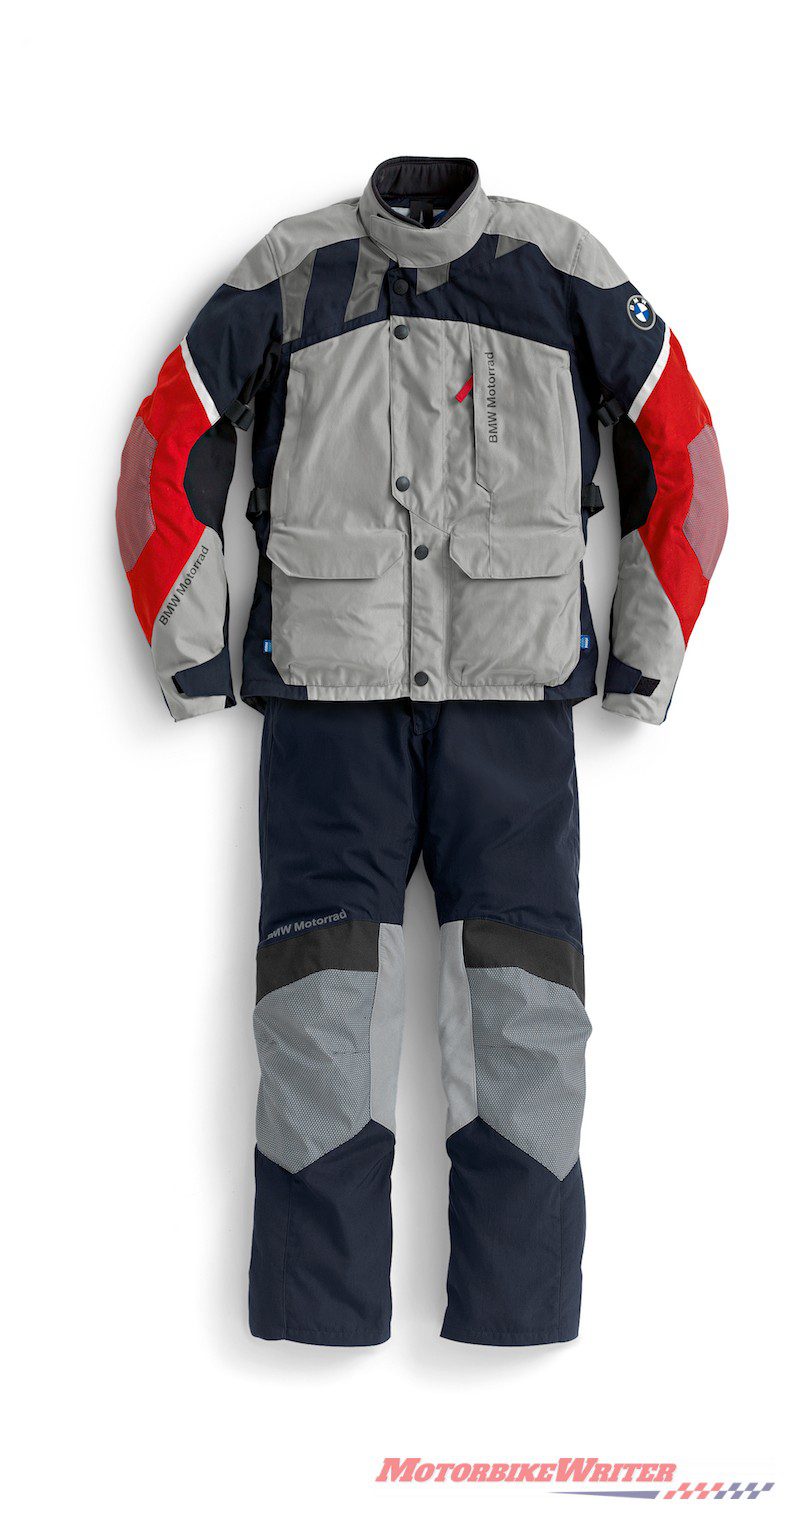 BMW GS dry suit  - new look